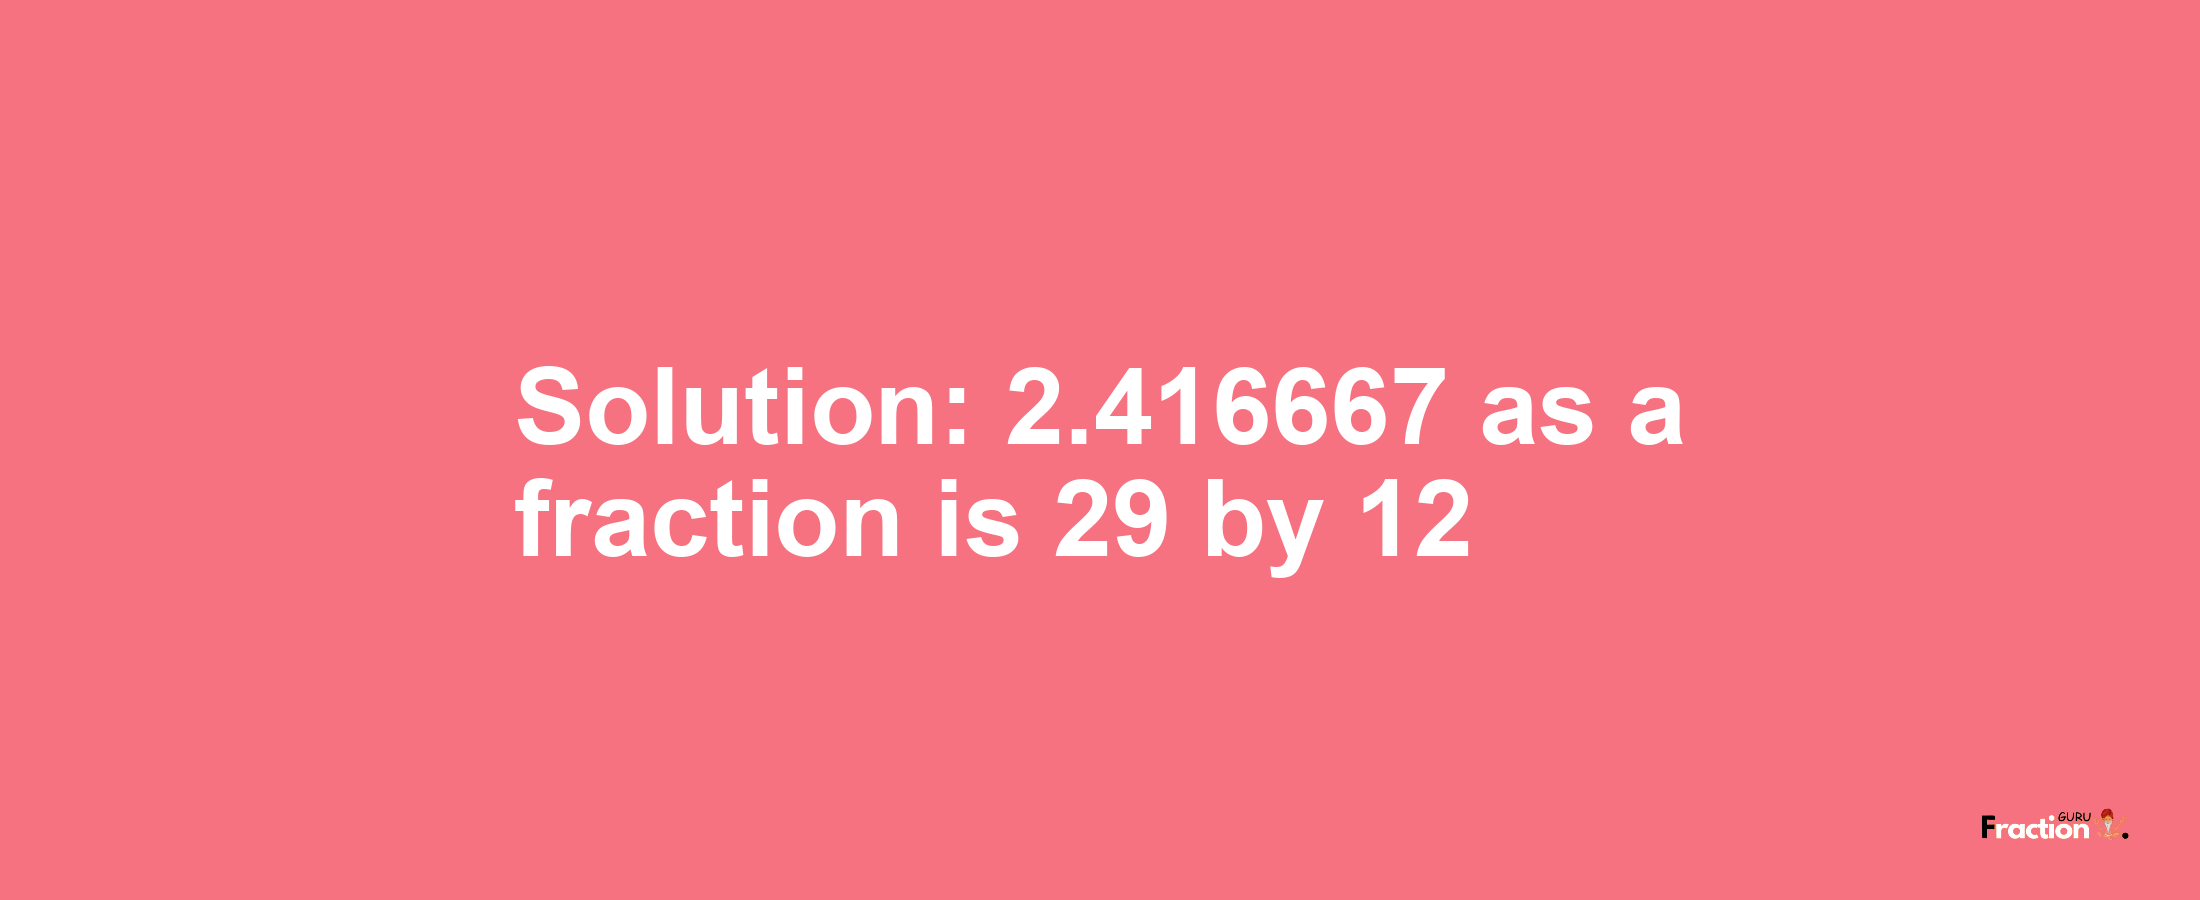 Solution:2.416667 as a fraction is 29/12